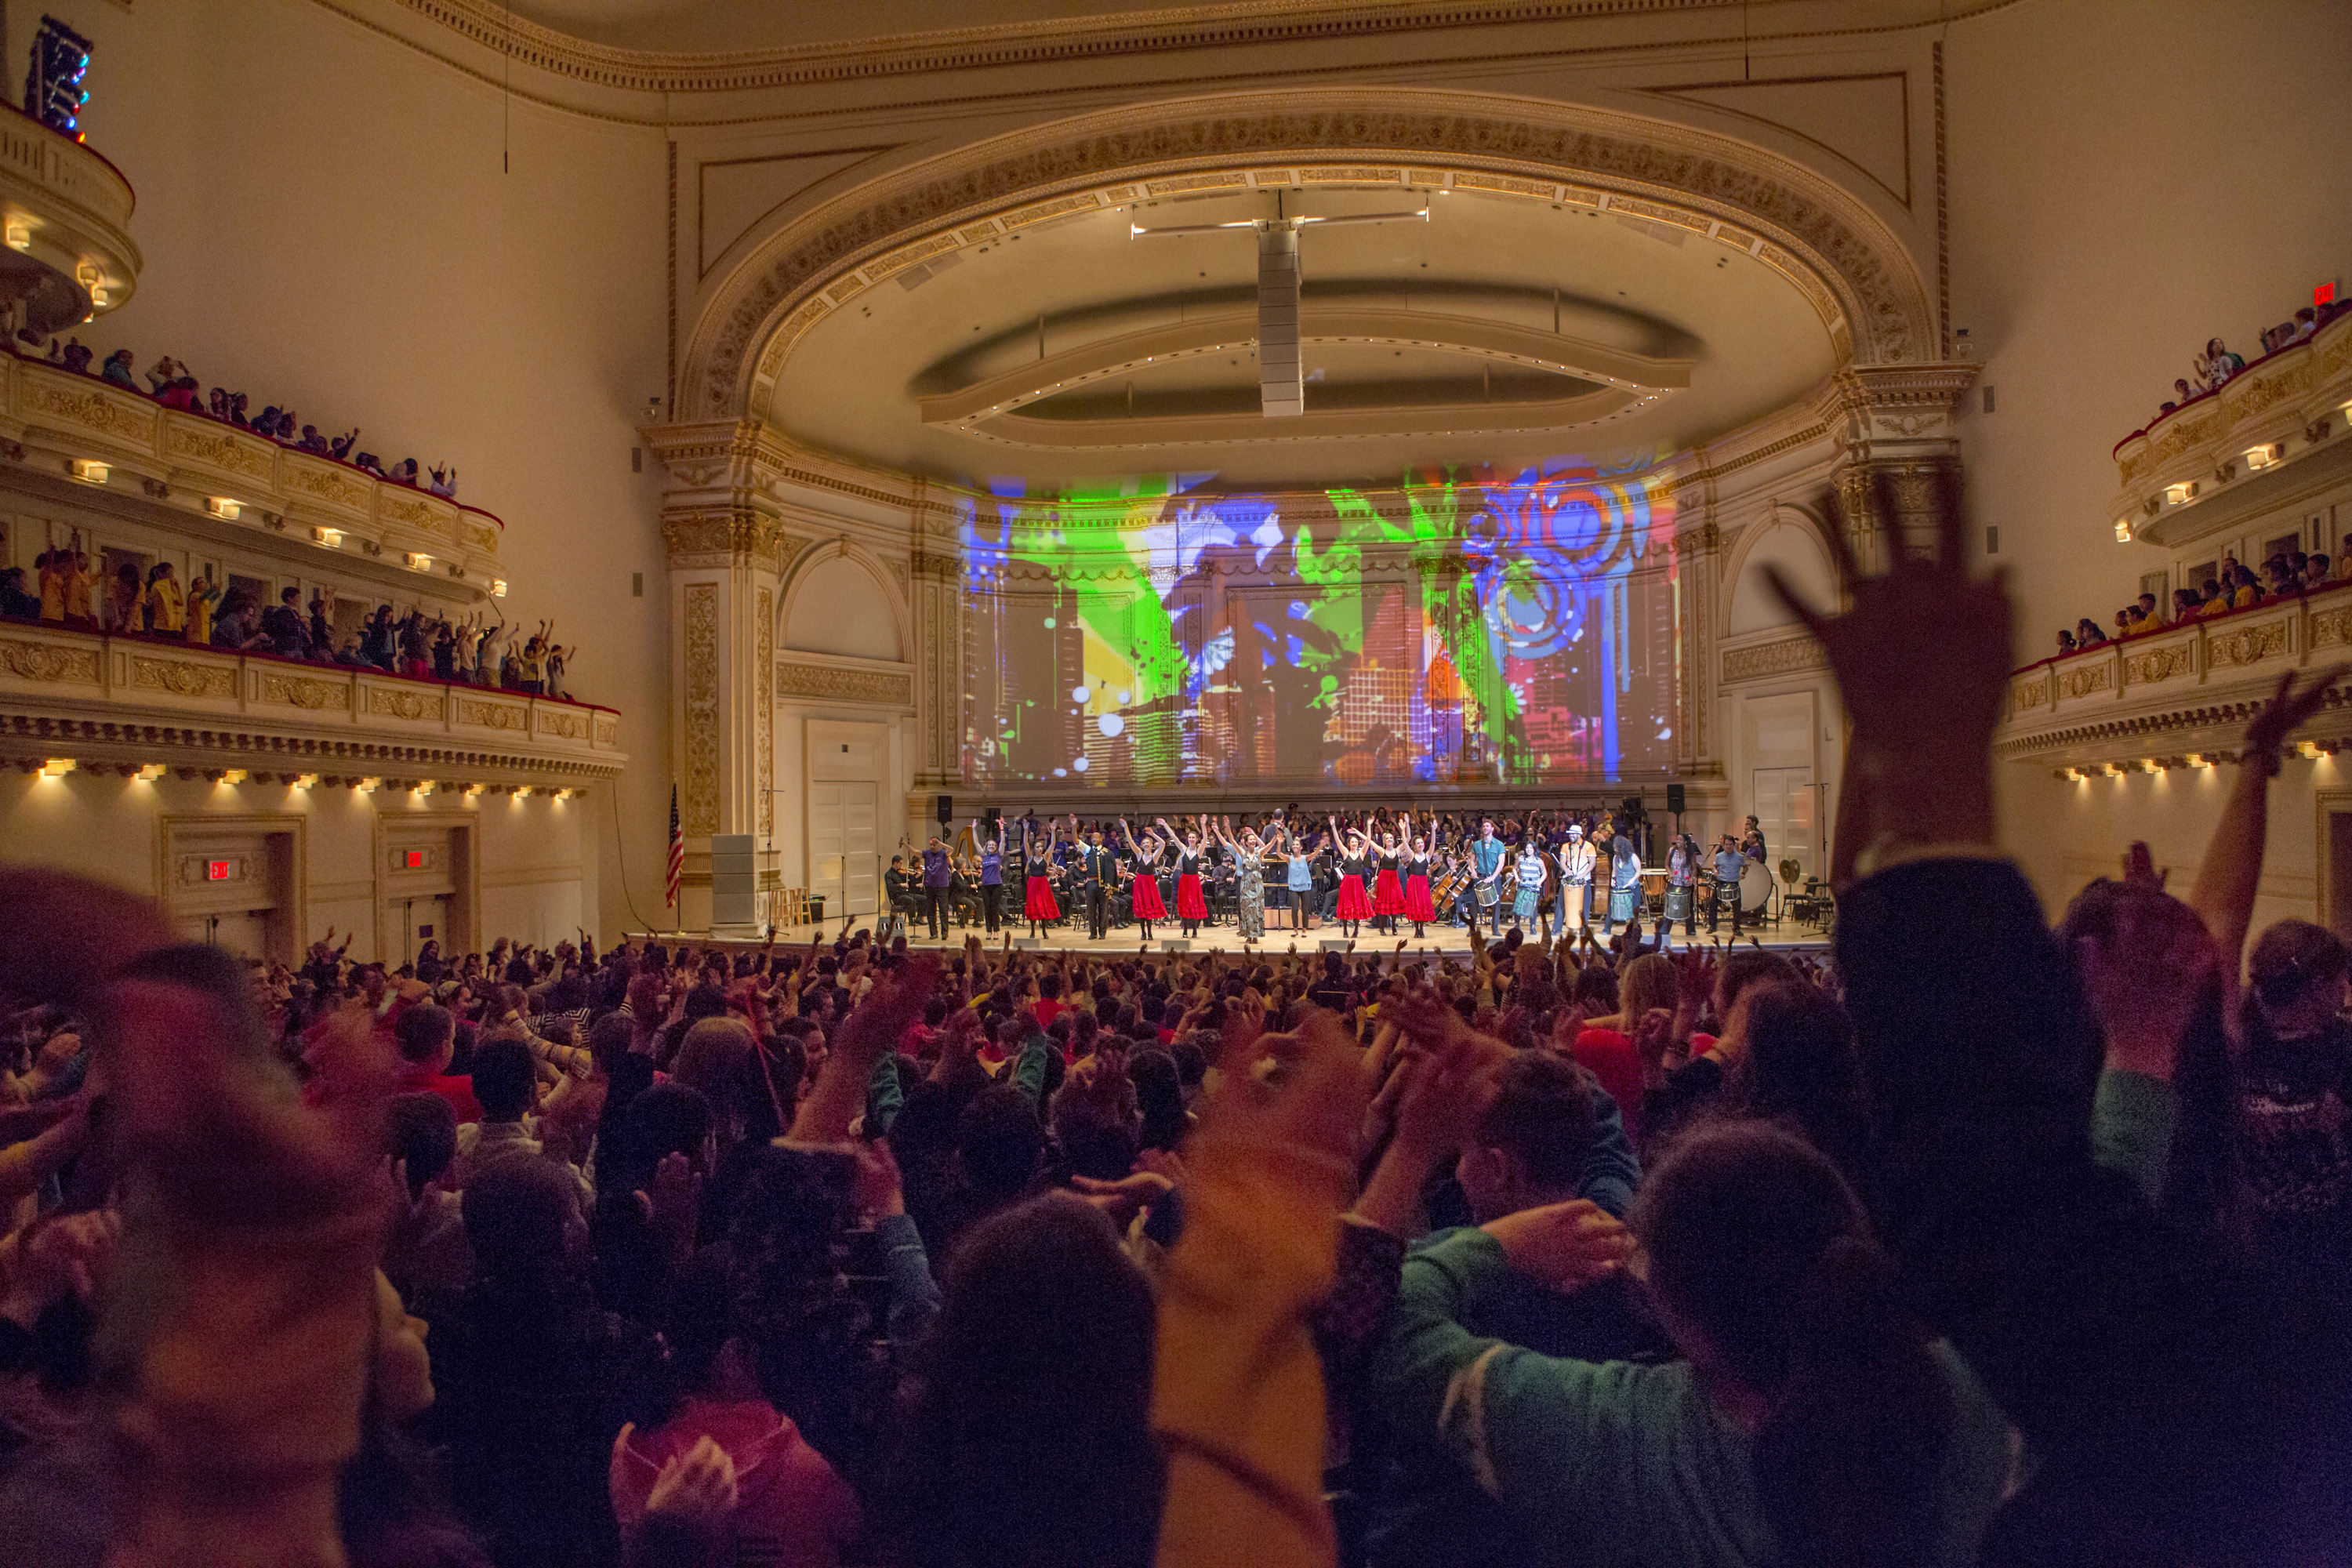 2017 Muscial America Shaping the Future of Education: Carnegie Hall at 125